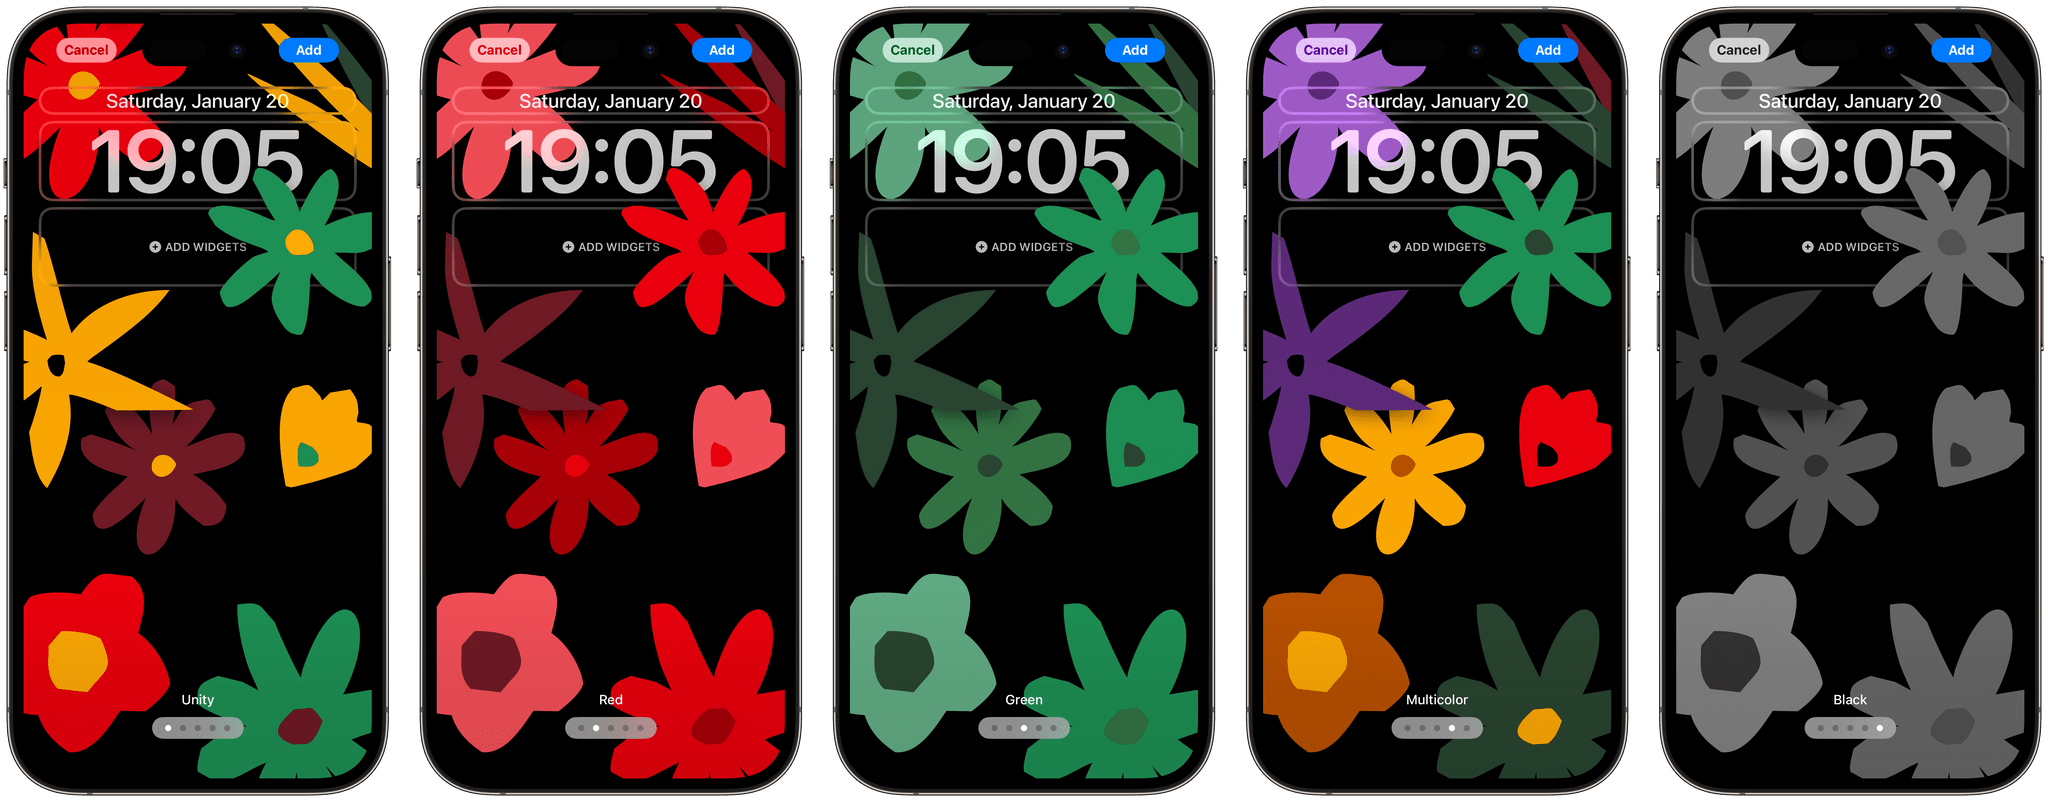 The new Unity Bloom wallpaper comes in five variants: Unity, Red, Green, Multicolor, and Black